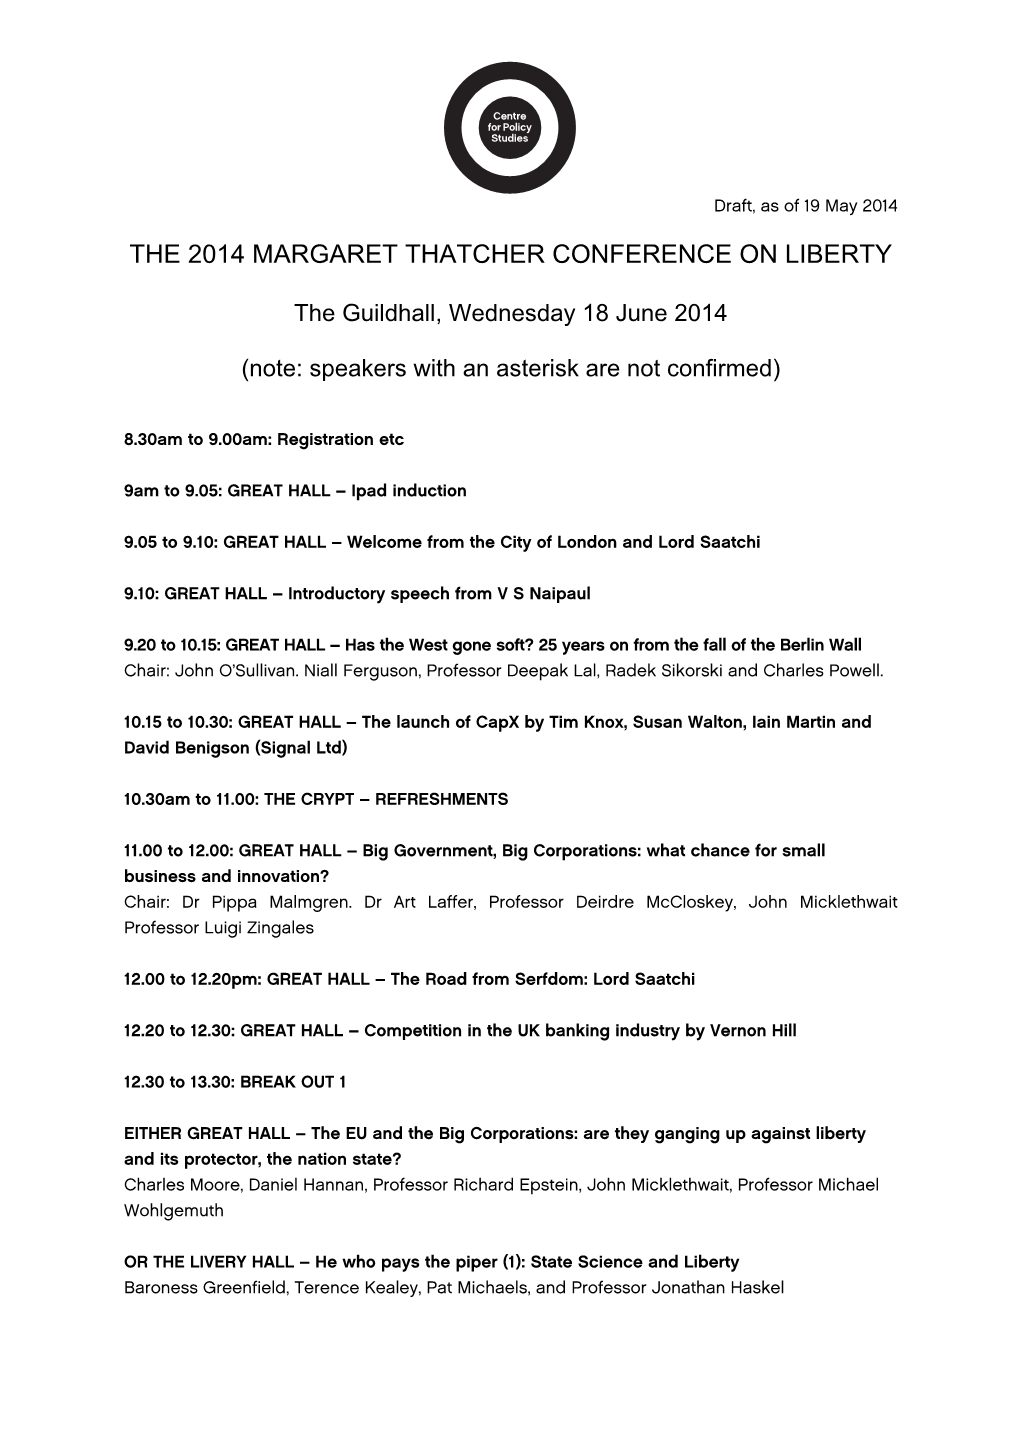 The 2014 Margaret Thatcher Conference on Liberty